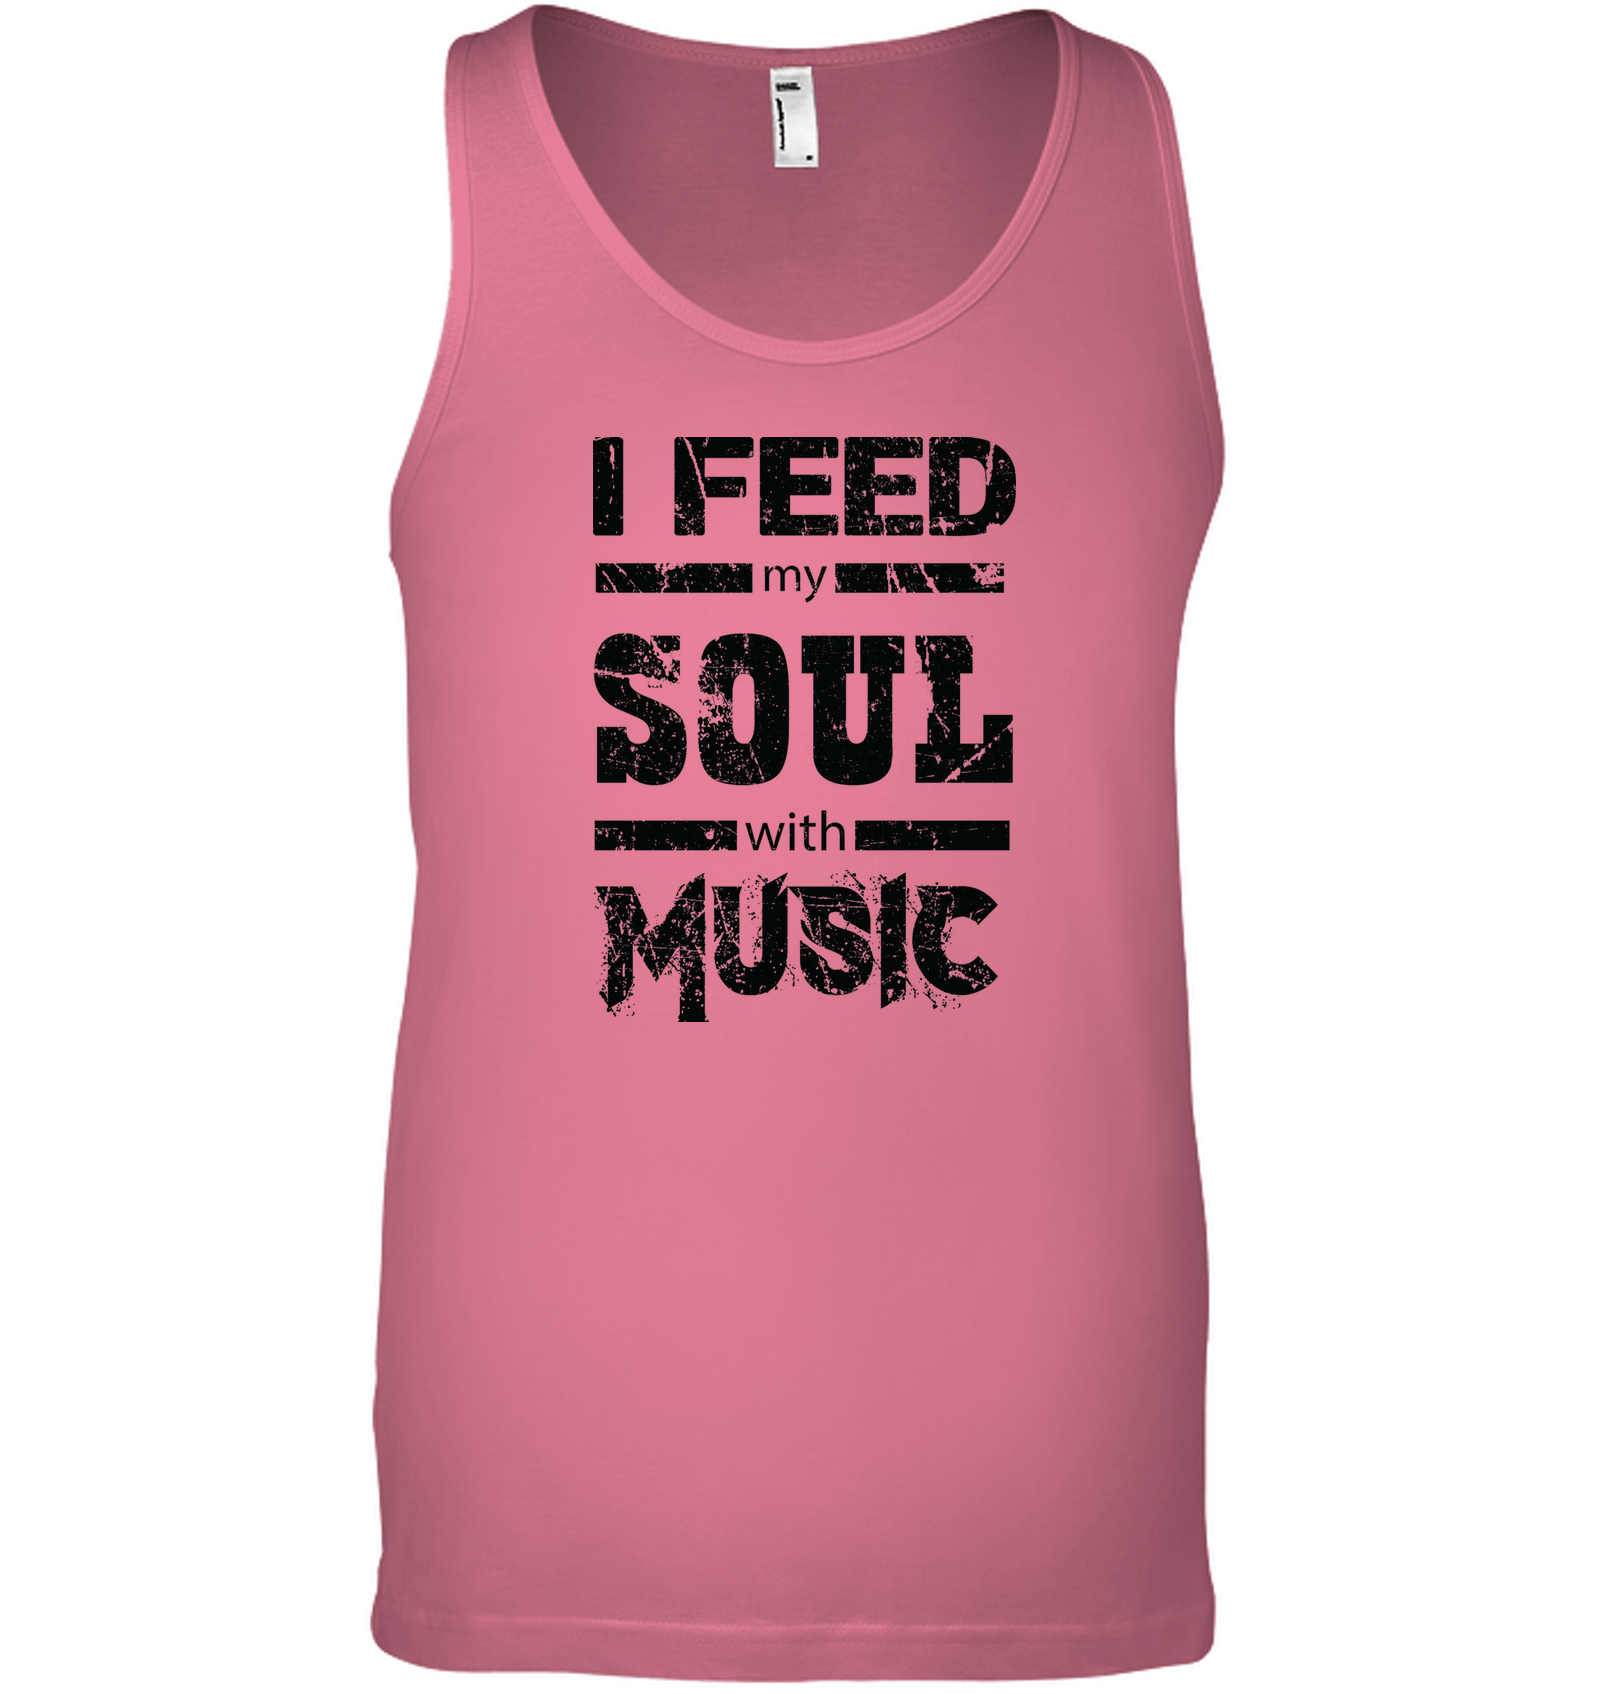 I Feed My Soul With Music - Bella + Canvas Unisex Jersey Tank